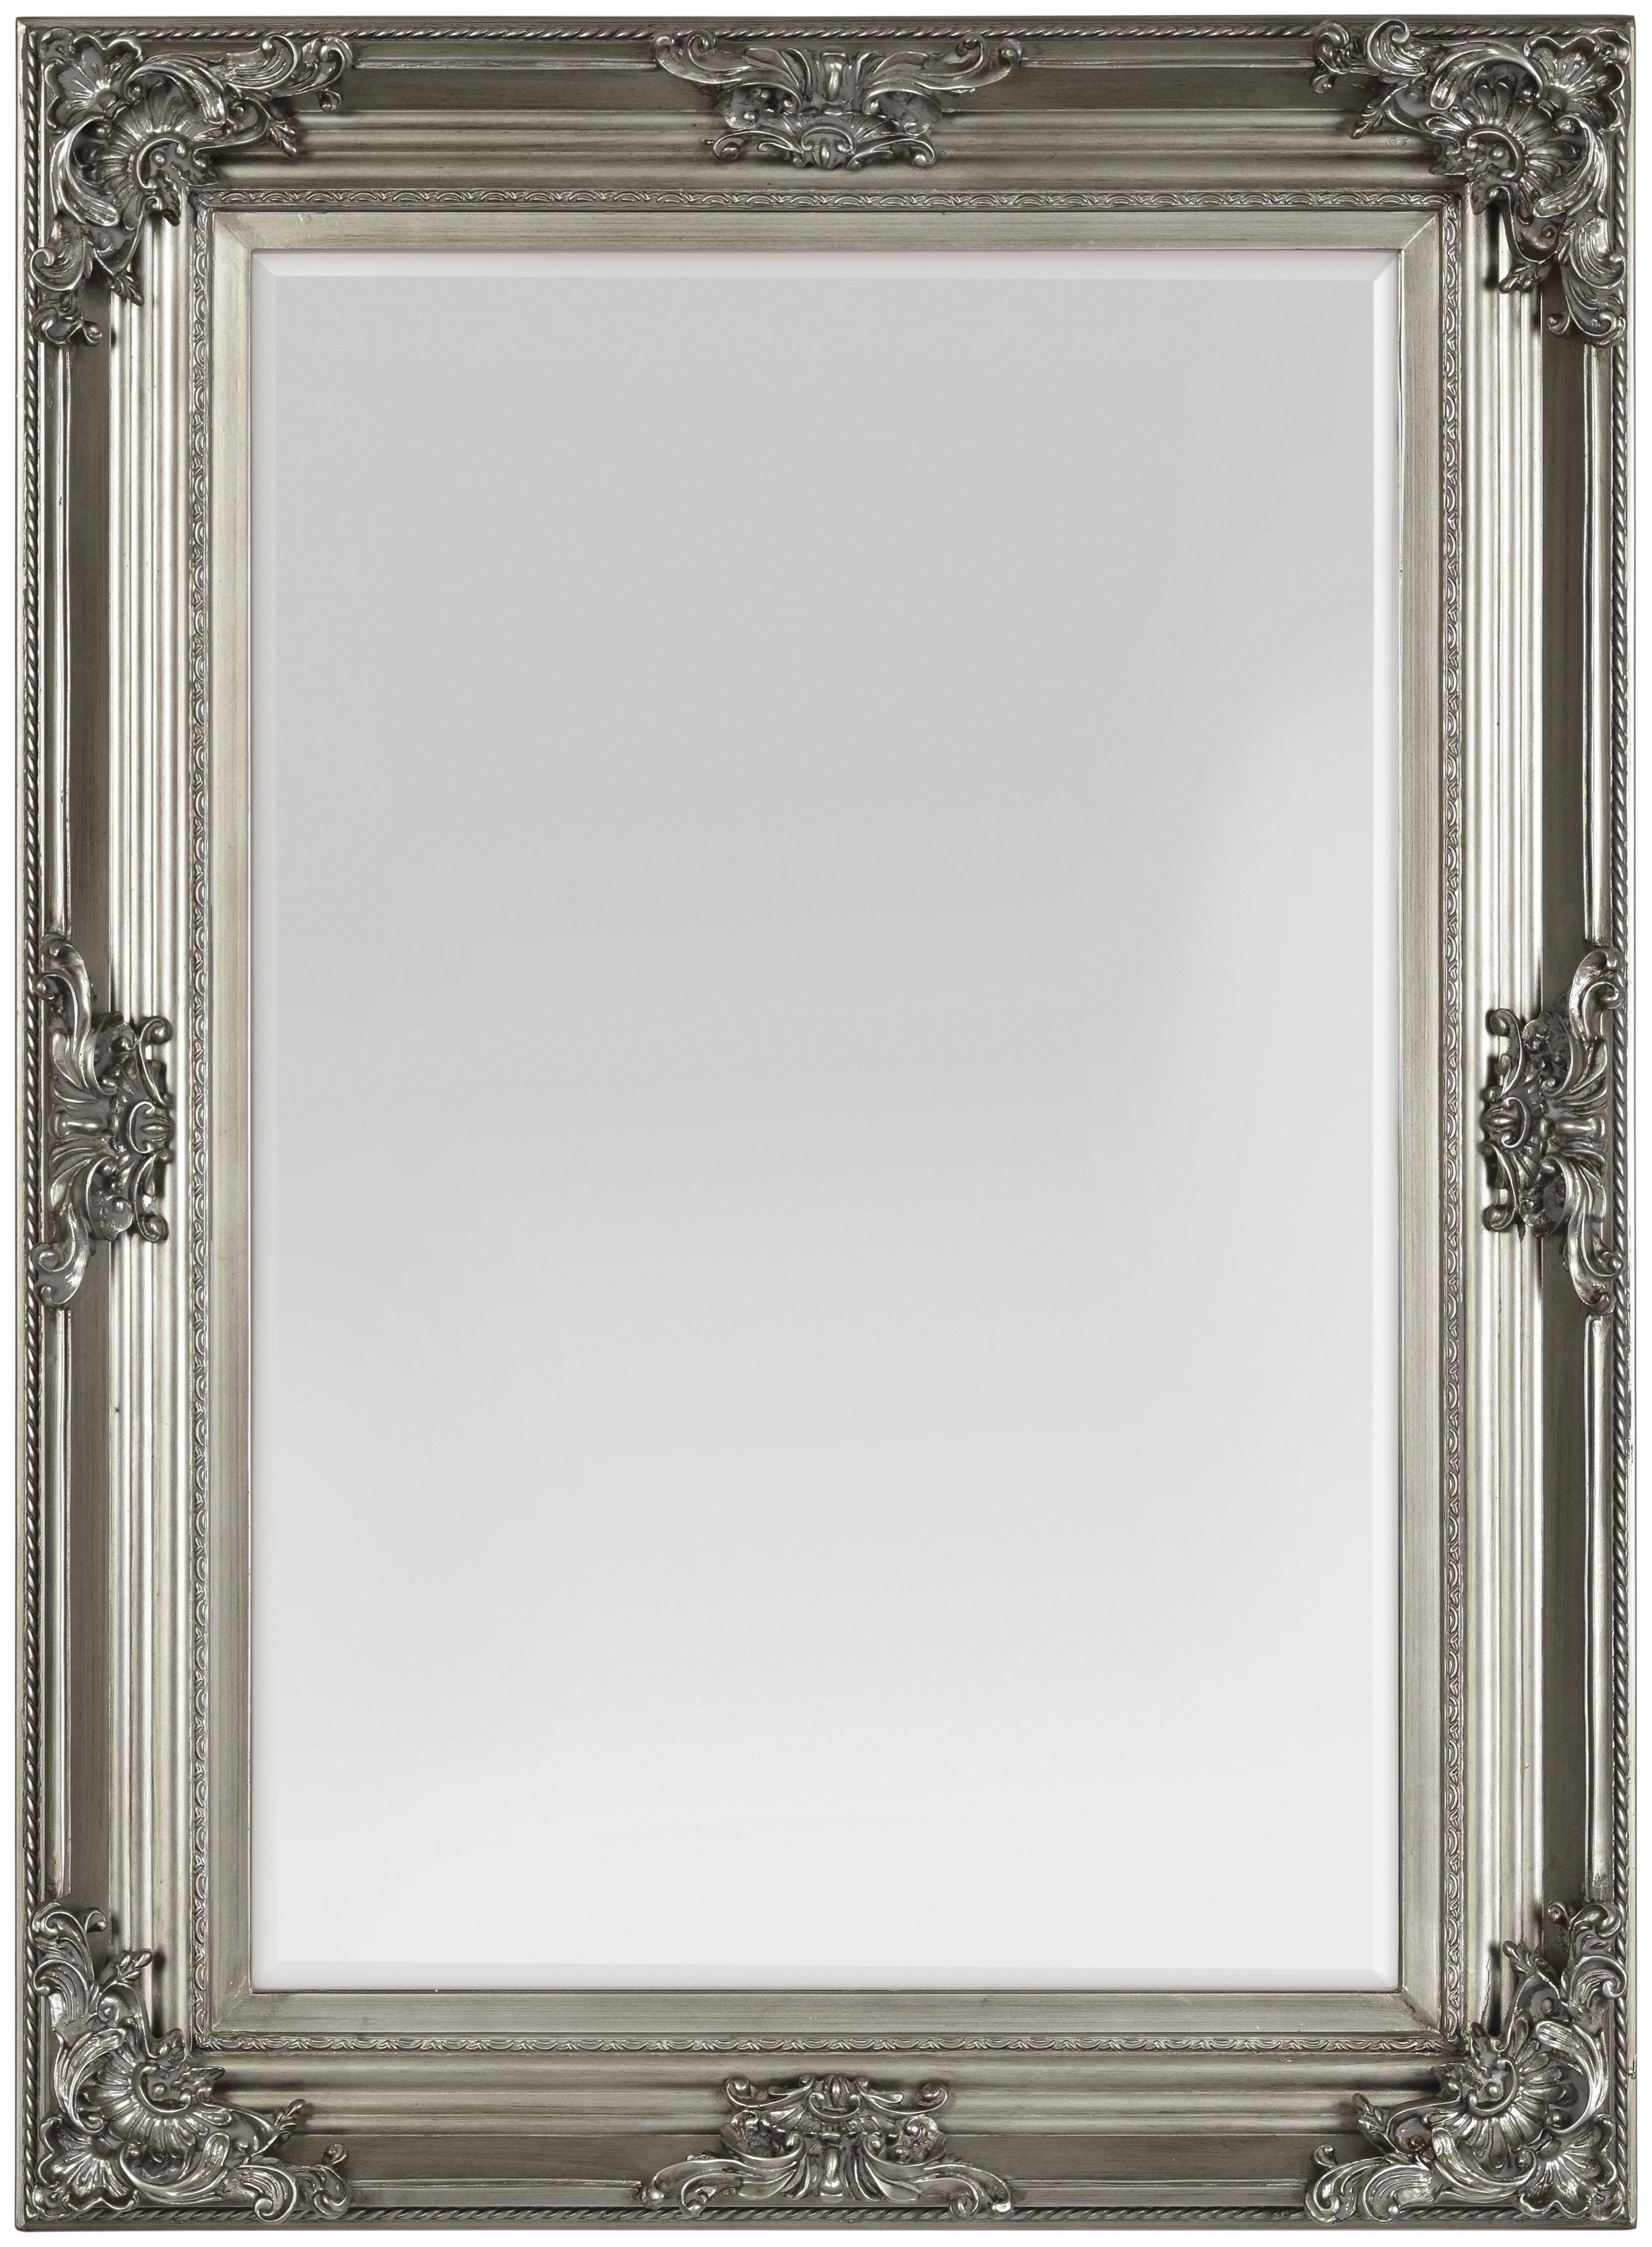 Antique Silver Mirror: A Reflection Of Timeless Elegance